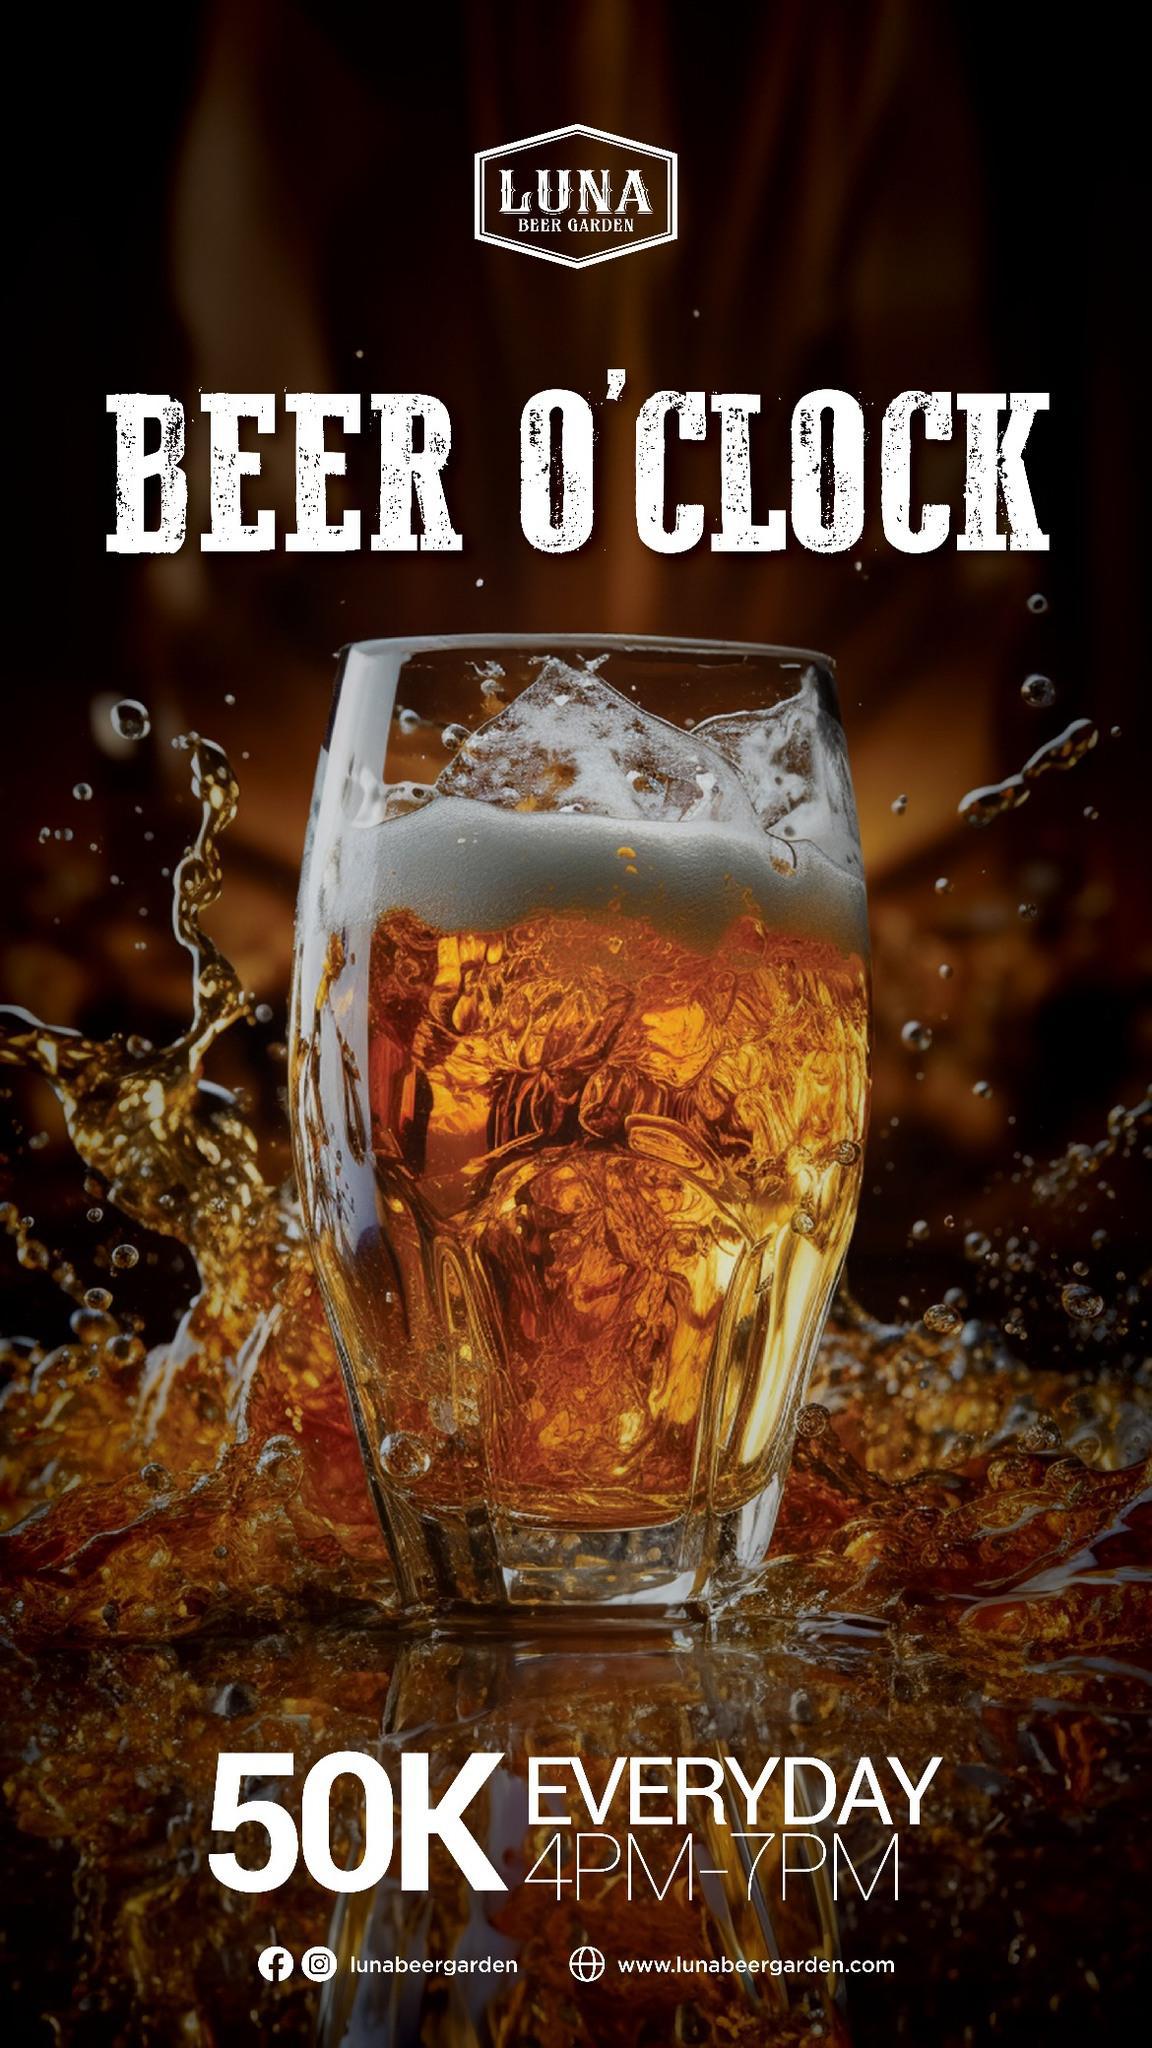 Beer O'Clock at Luna Beer Garden Every Day 4-7pm